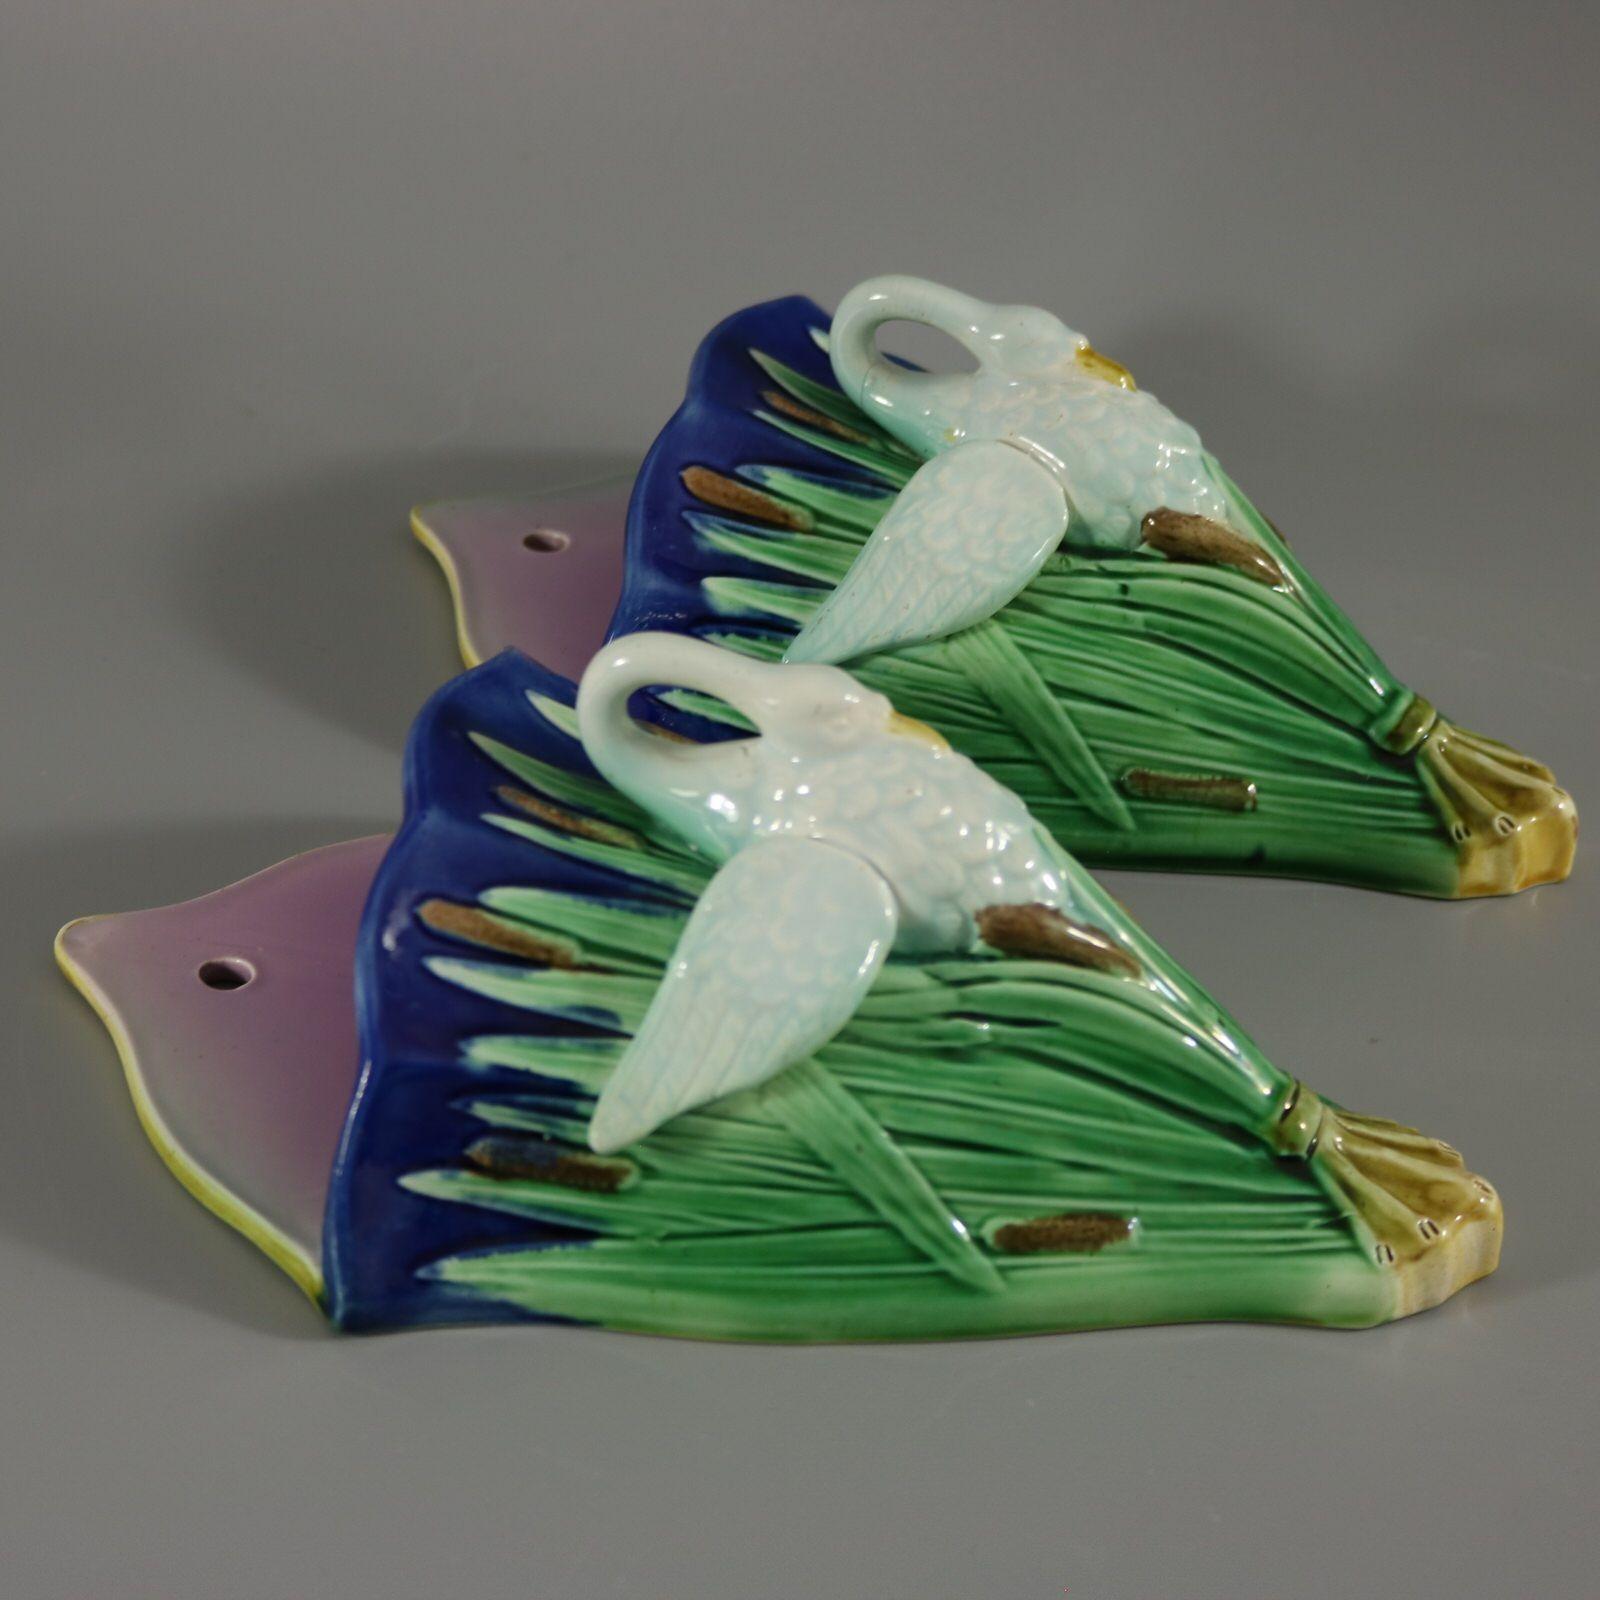 Pair of Adams and Bromley (attributed) Majolica wall pockets which feature swans amongst cattails/bulrushes. Colouration: cobalt blue, green, white, are predominant.